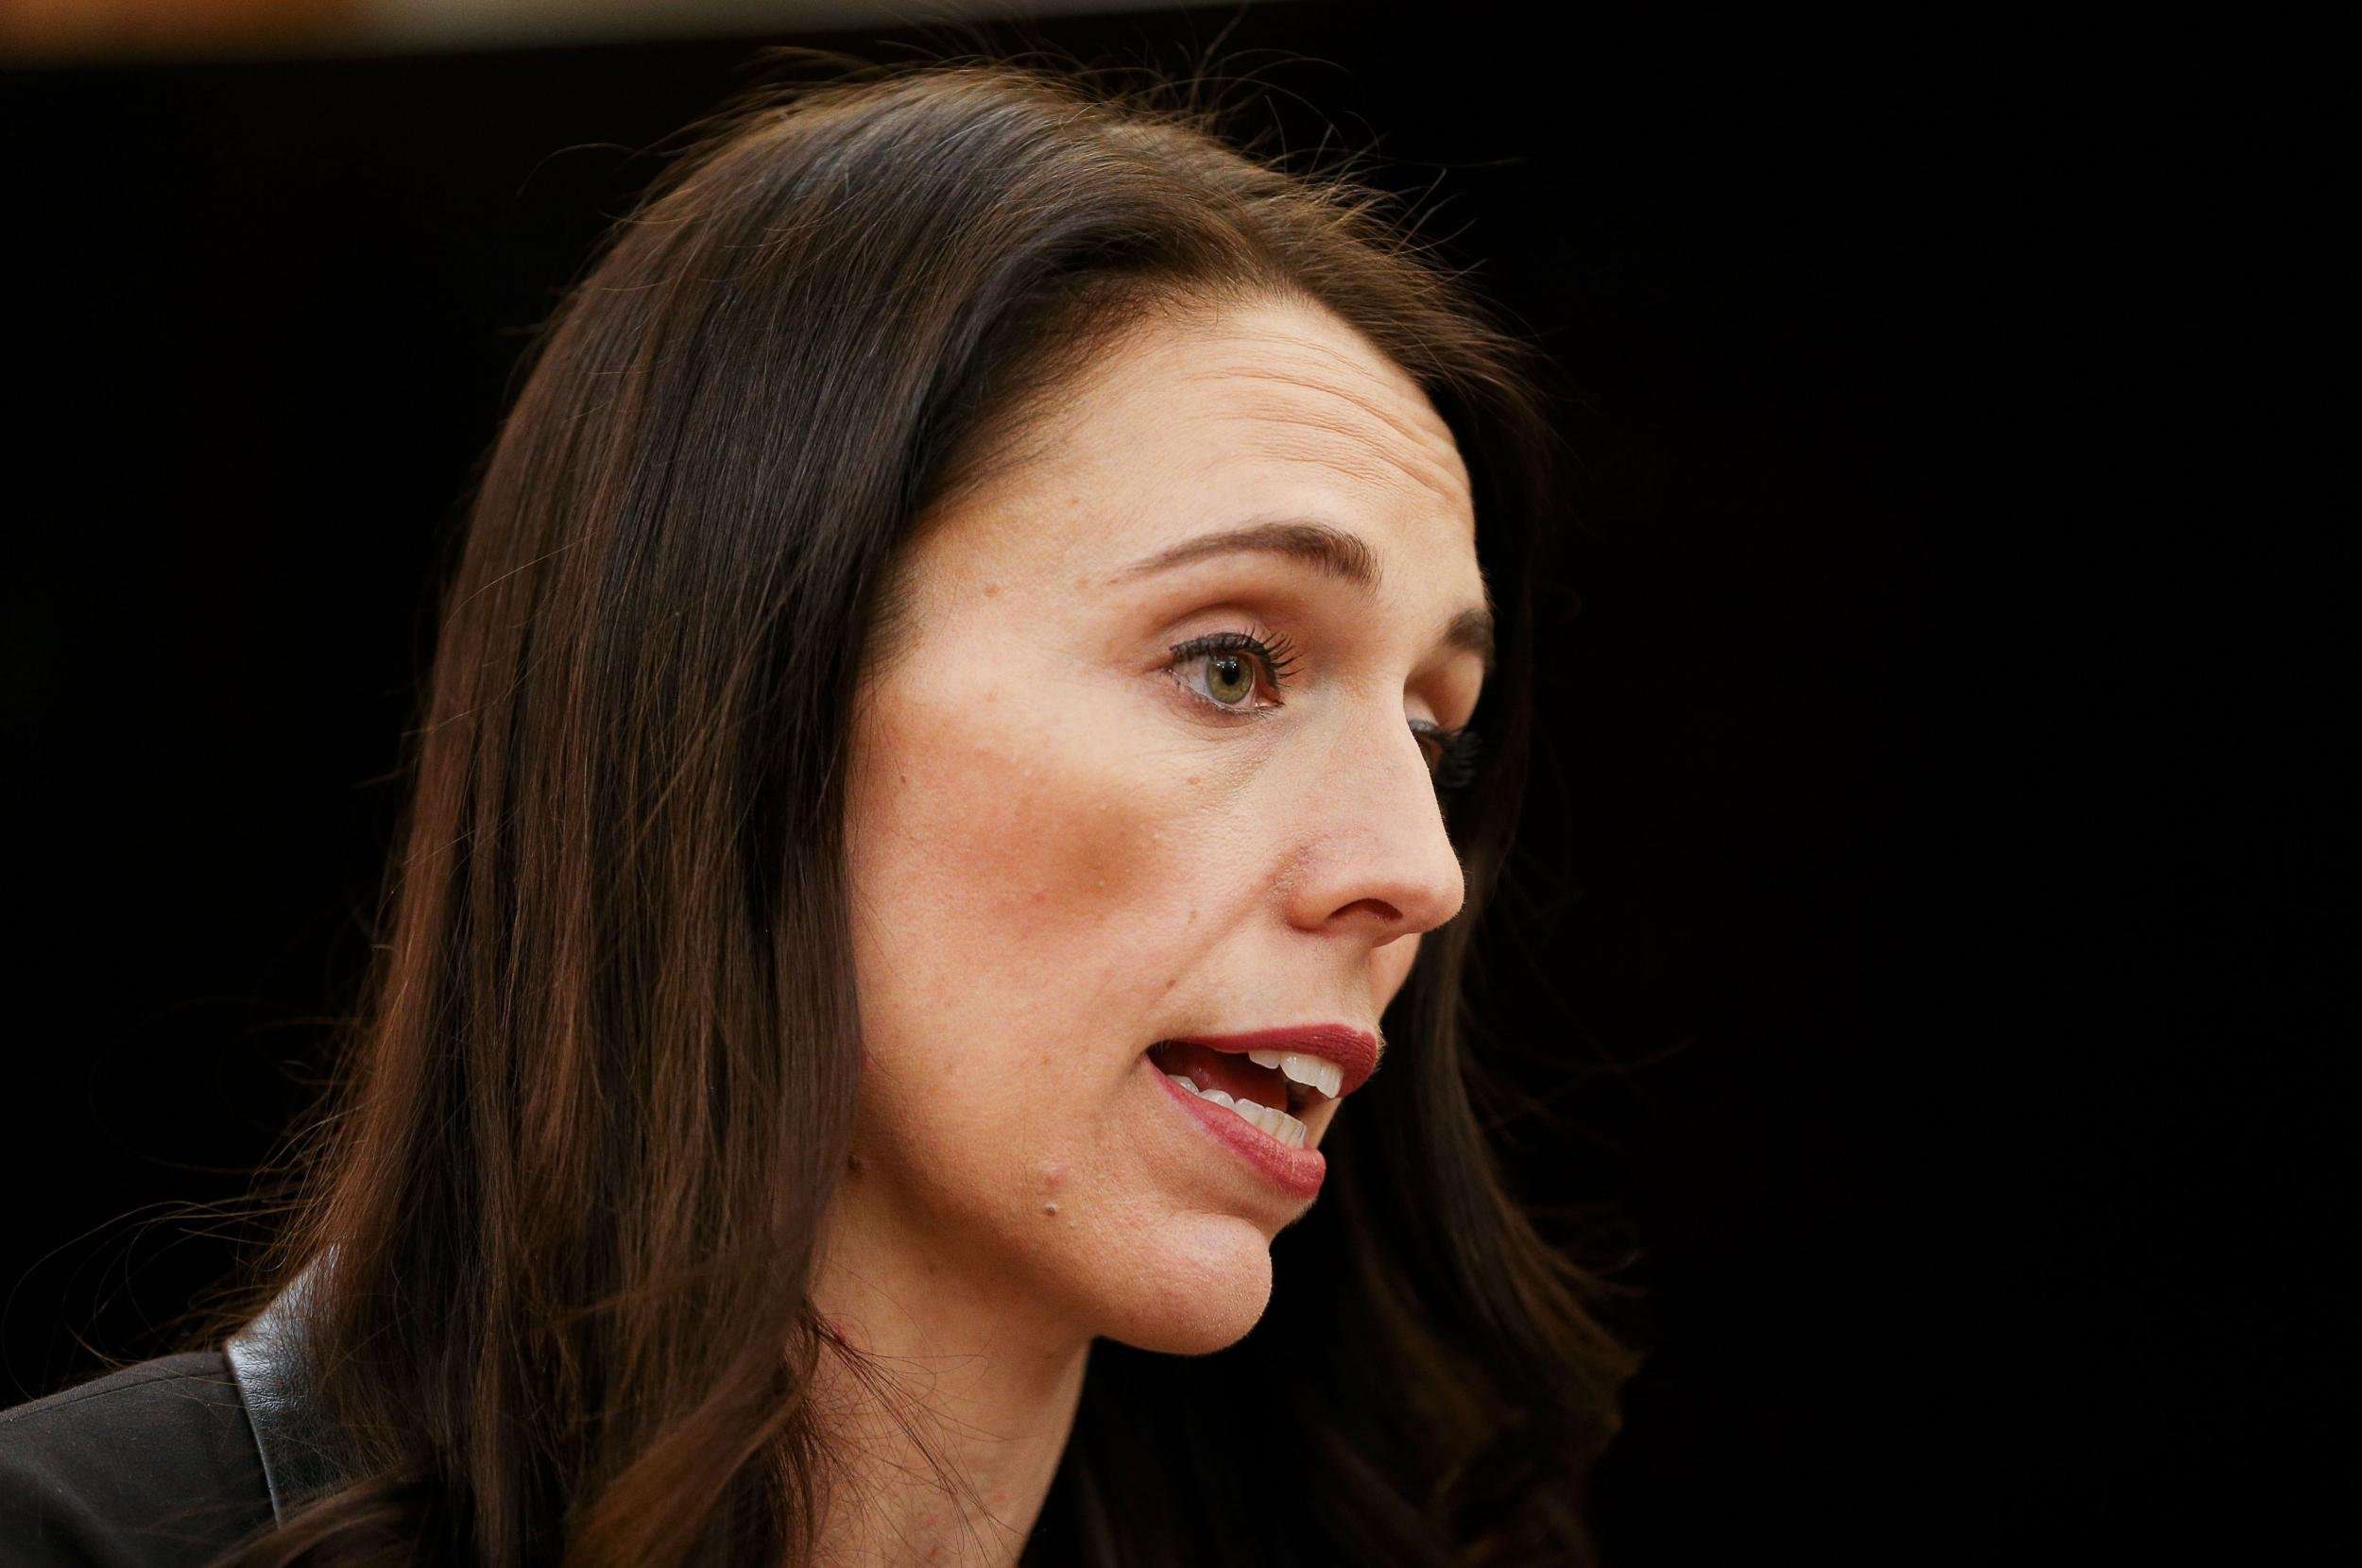 image for New Zealand’s new prime minister calls capitalism a ‘blatant failure’